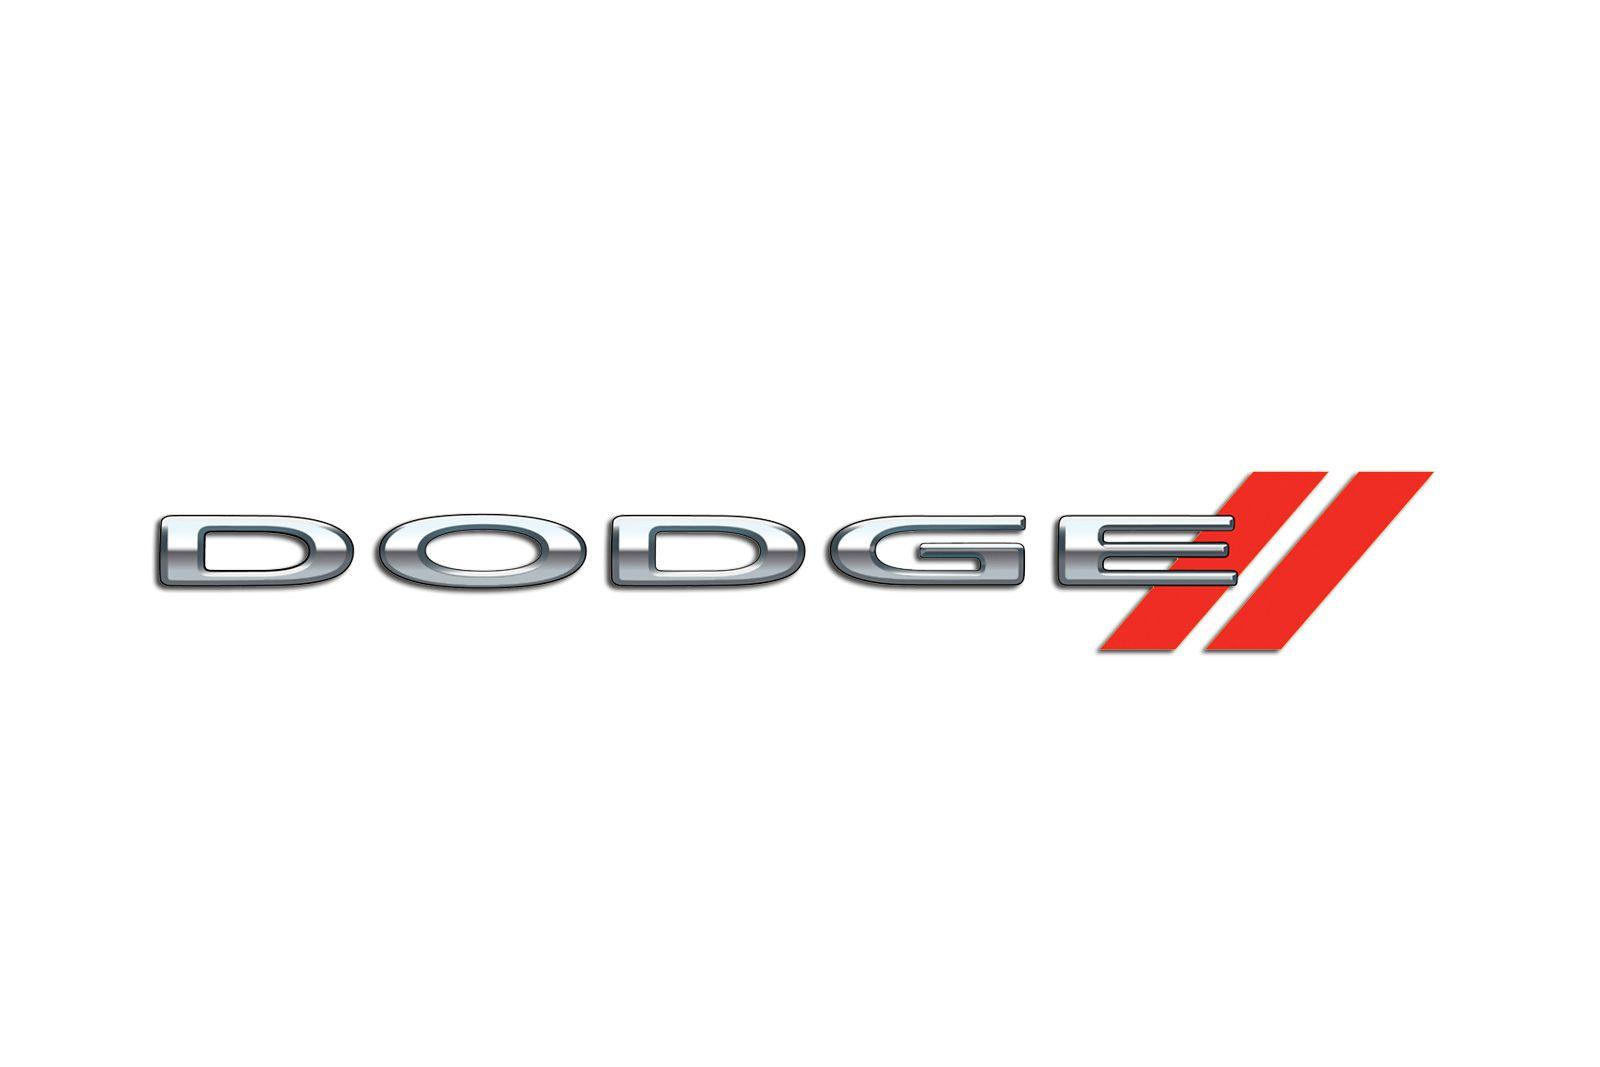 Two Red Rhombus Logo - Dodge Logo, Dodge Car Symbol Meaning and History | Car Brand Names.com